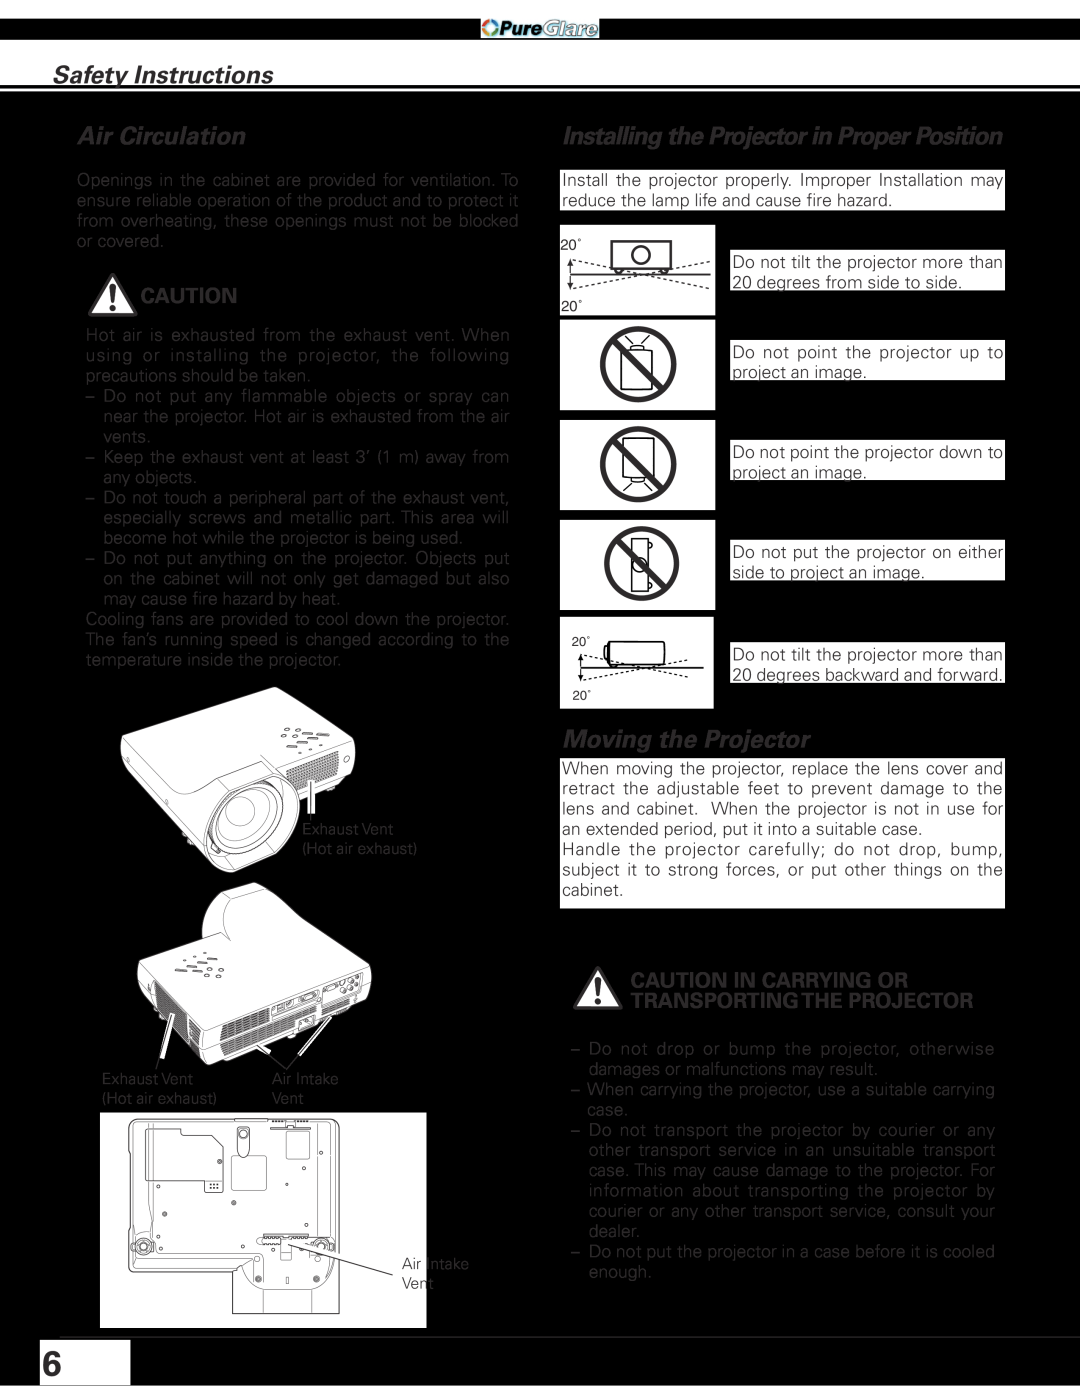 Sanyo PLC-XL45 Safety Instructions Air Circulation, Installing the Projector in Proper Position, Moving the Projector 